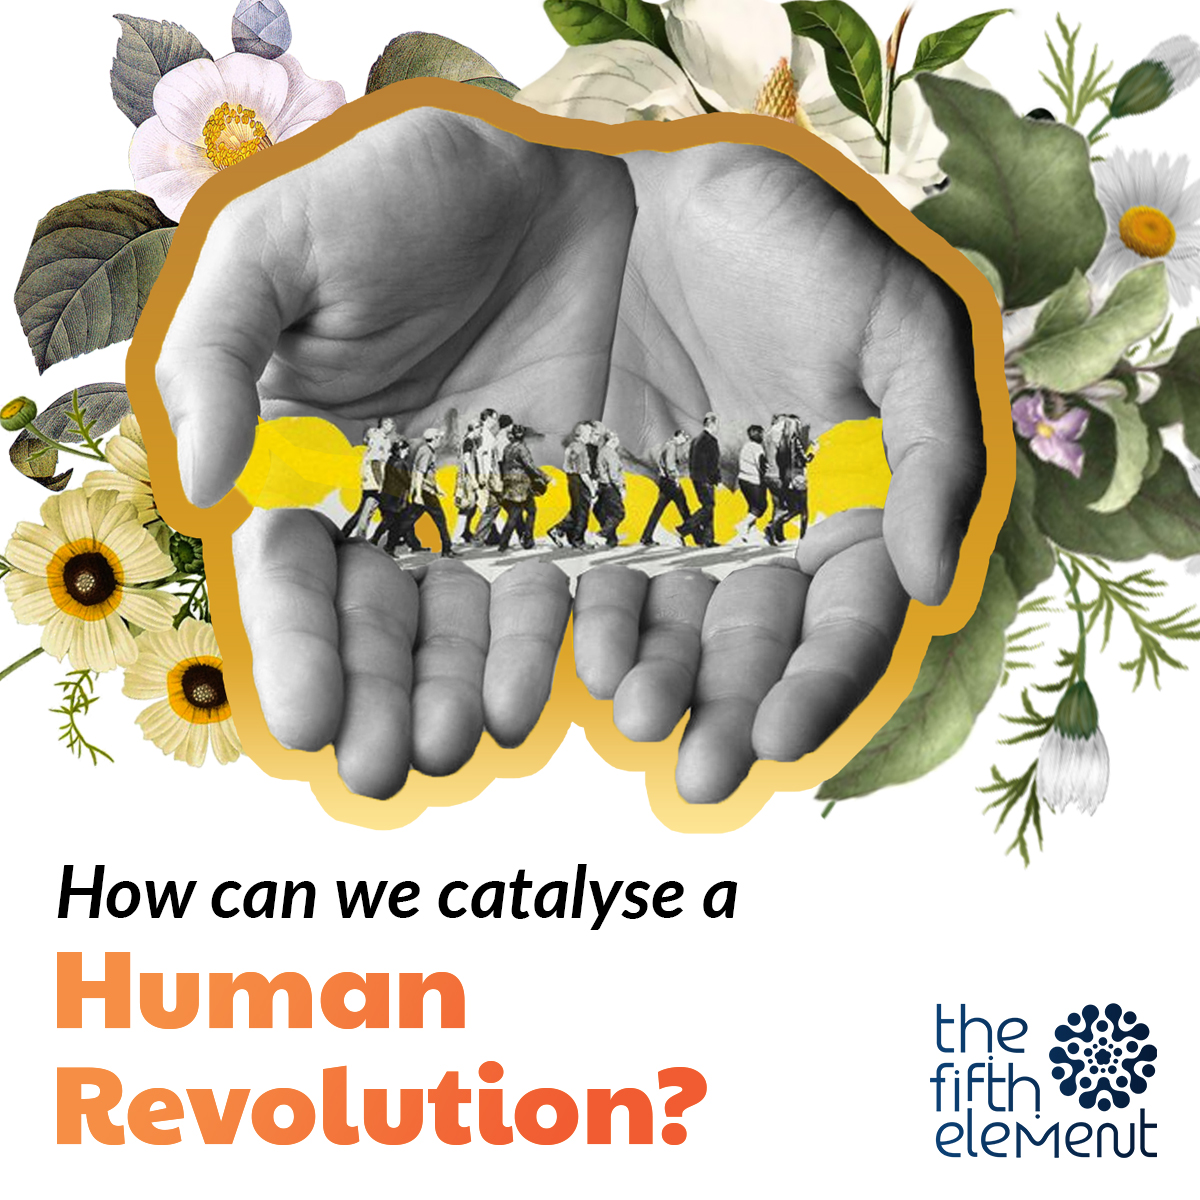 The Fifth Element hosts a range of engagements working towards a #Regenerative Economy, examining the role of #digitalisation, reframing #academia, building opportunities for a systemic change in Africa, and fostering youth leadership. Learn more ➡️ thefifthelement.earth/engagements/